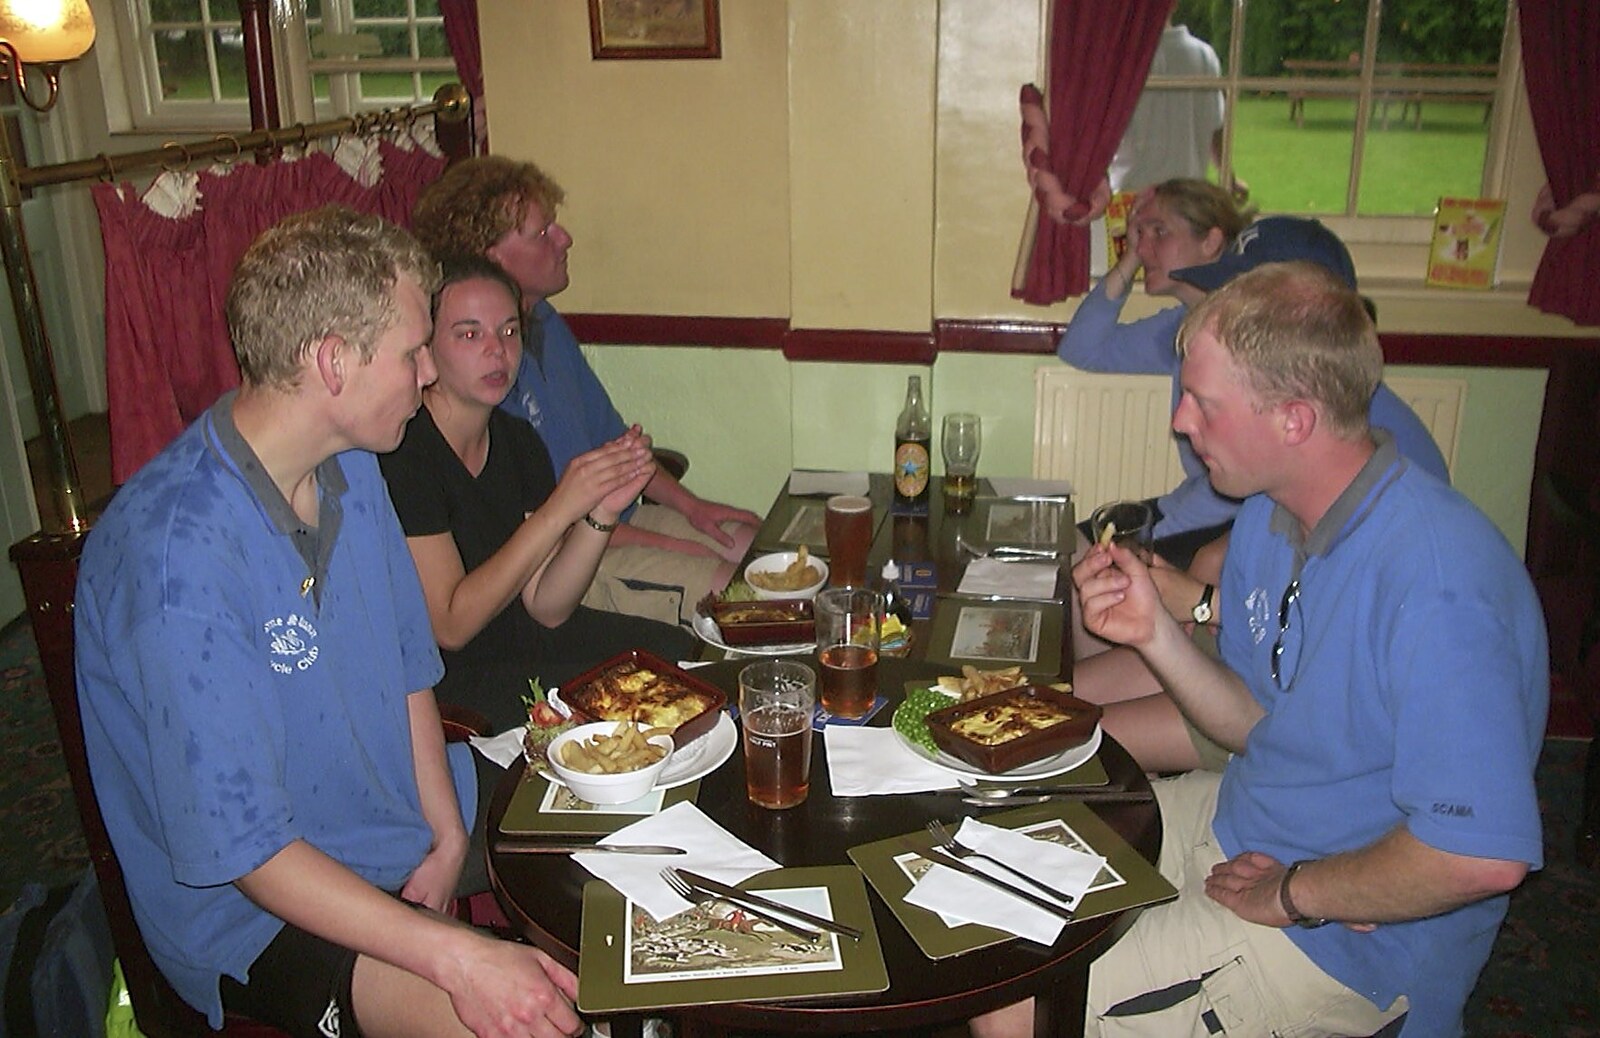 The BSCC Annual Sponsored Bike Ride, The Cottage, Thorpe St. Andrew, Norwich  - 18th July 2004: It's time for lunch - Bill is a bit damp